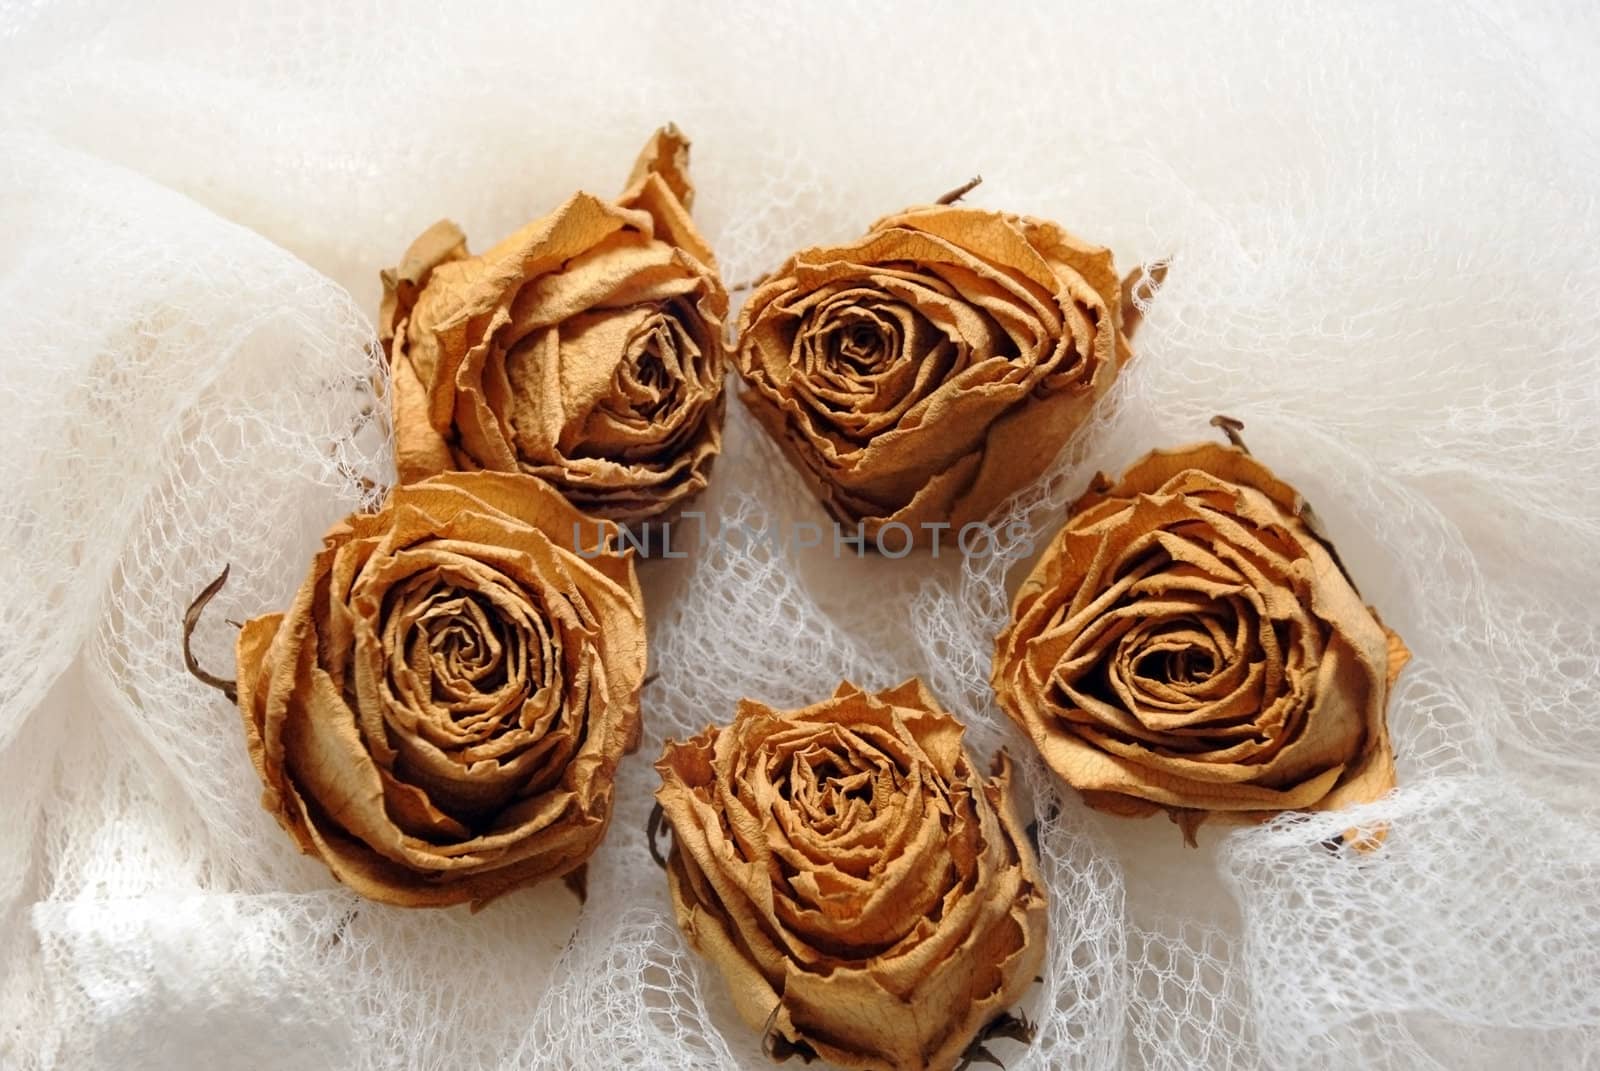 The withering roses lying in loneliness, fabric surface, white background